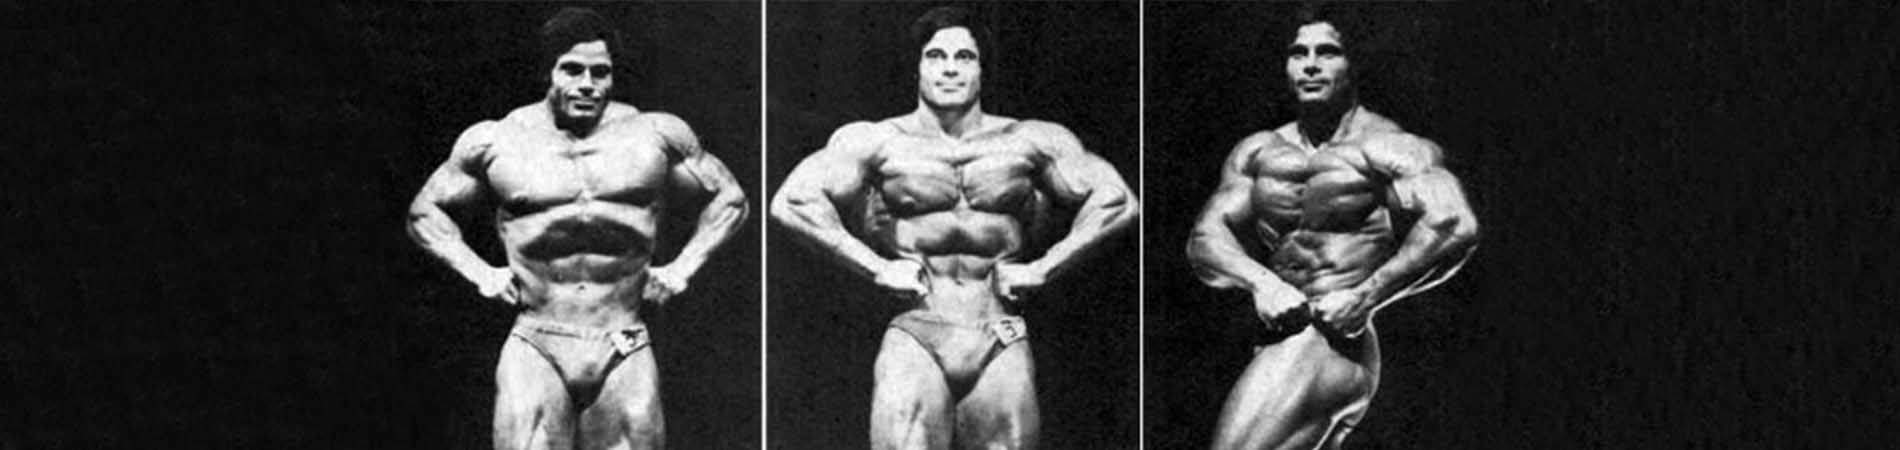 8 Bodybuilding Poses Explained by a Natural Pro Bodybuilder - Breaking  Muscle